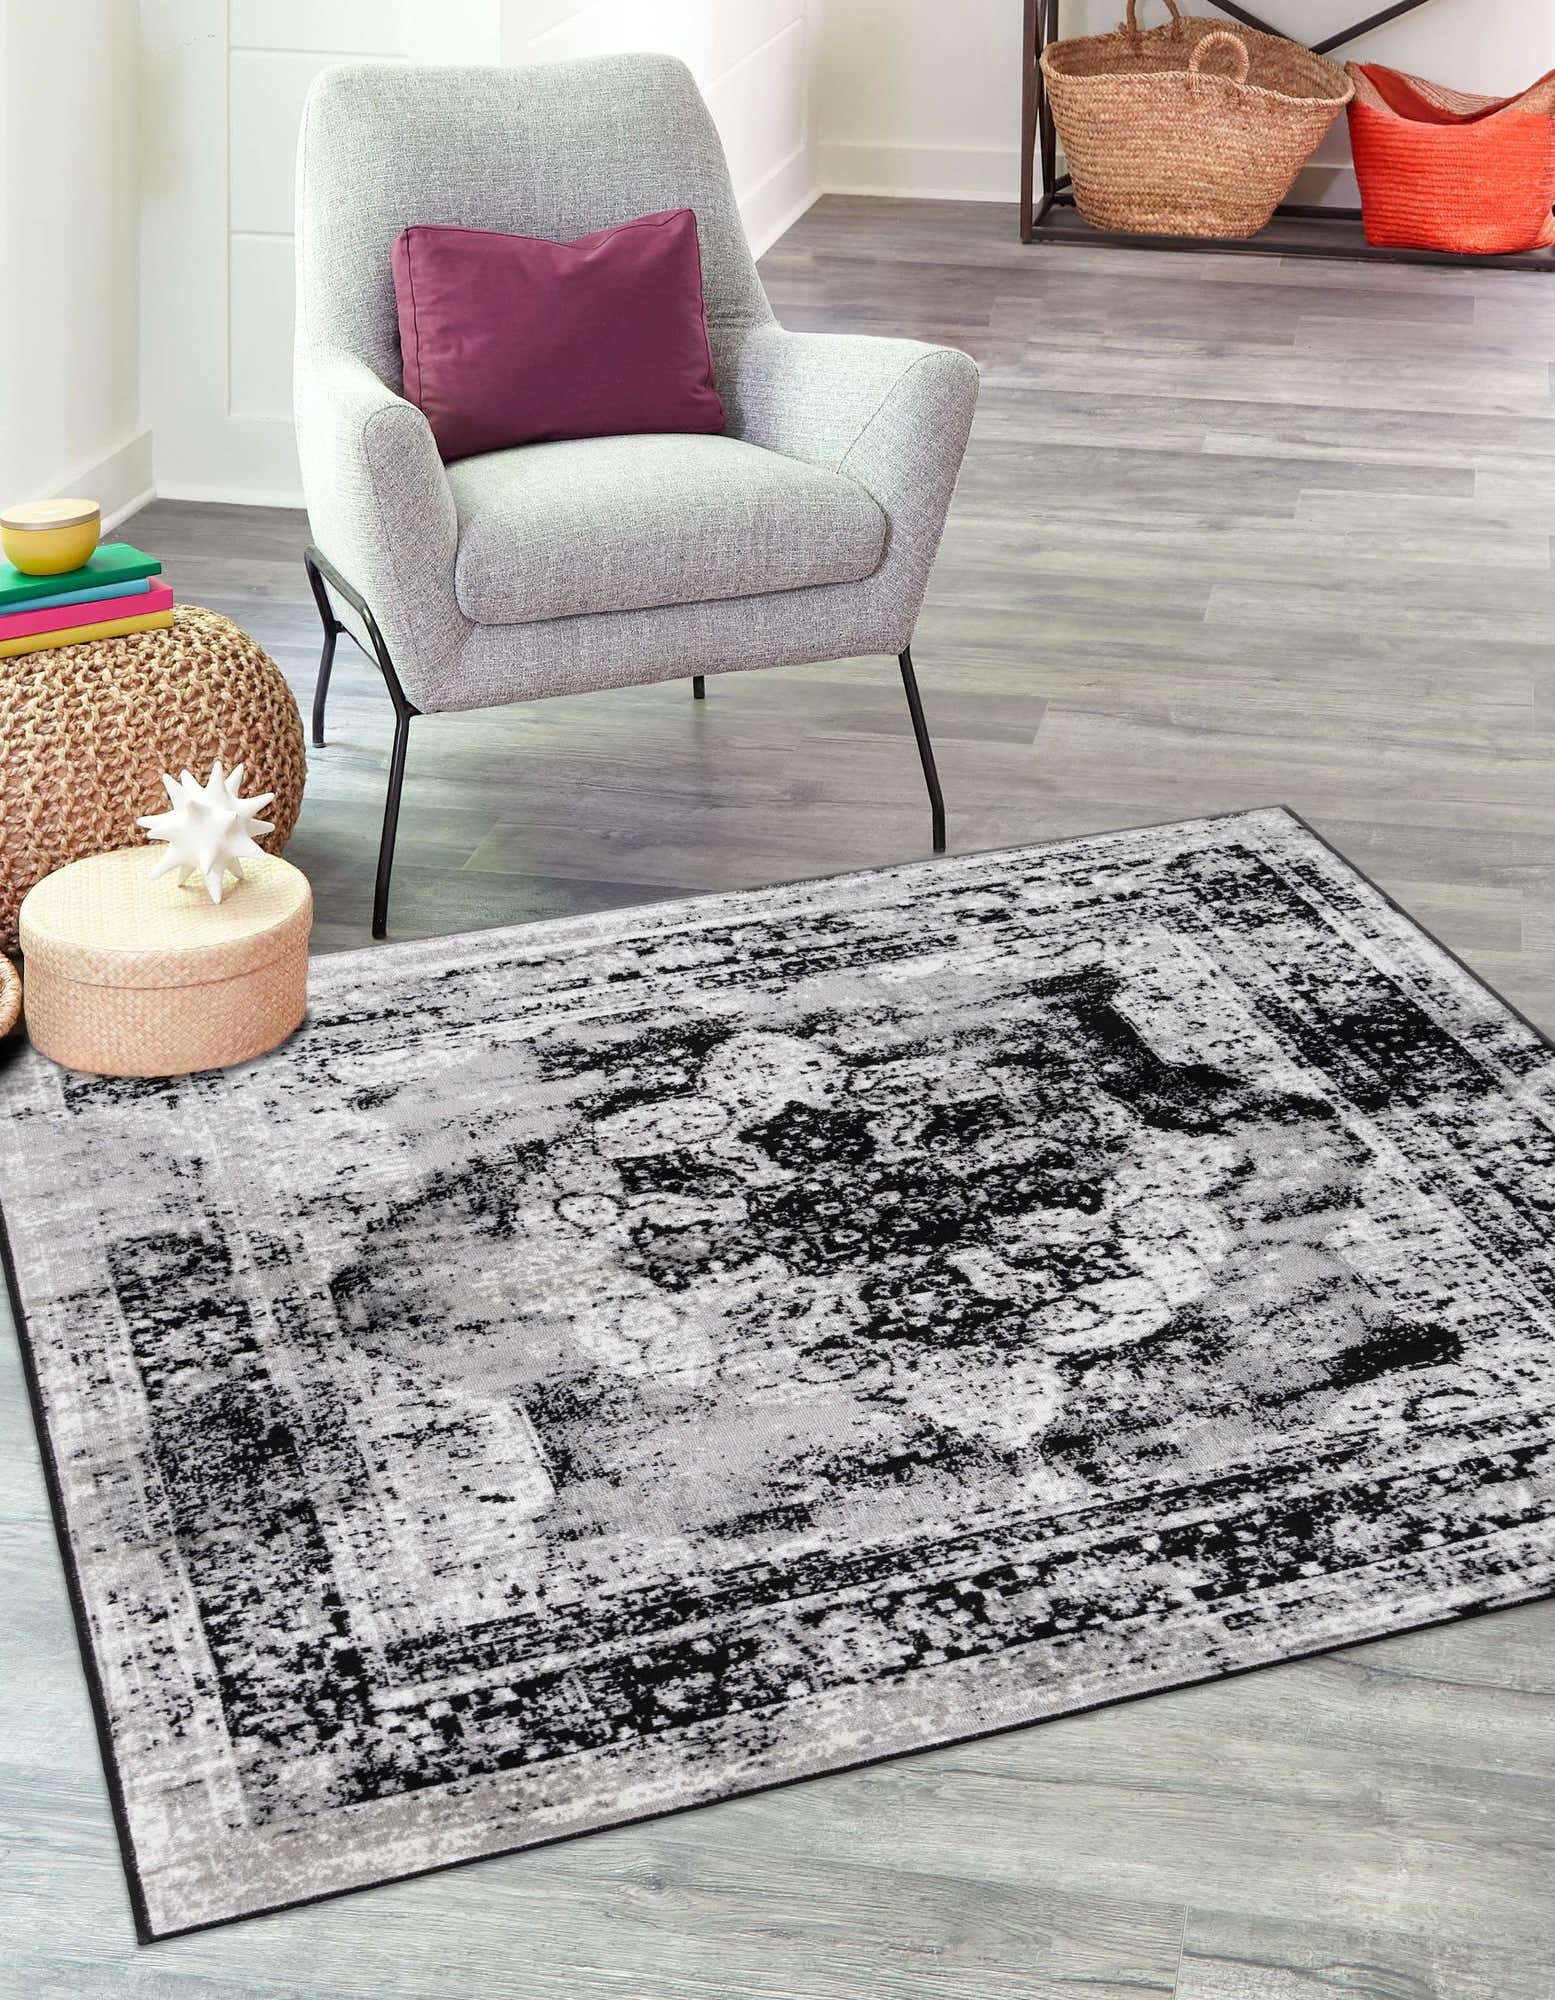 Unique Loom Salle Garnier Sofia Rug Black/Ivory 6' 1" Square Border Bohemian Perfect For Dining Room Living Room Bed Room Kids Room - image 4 of 7